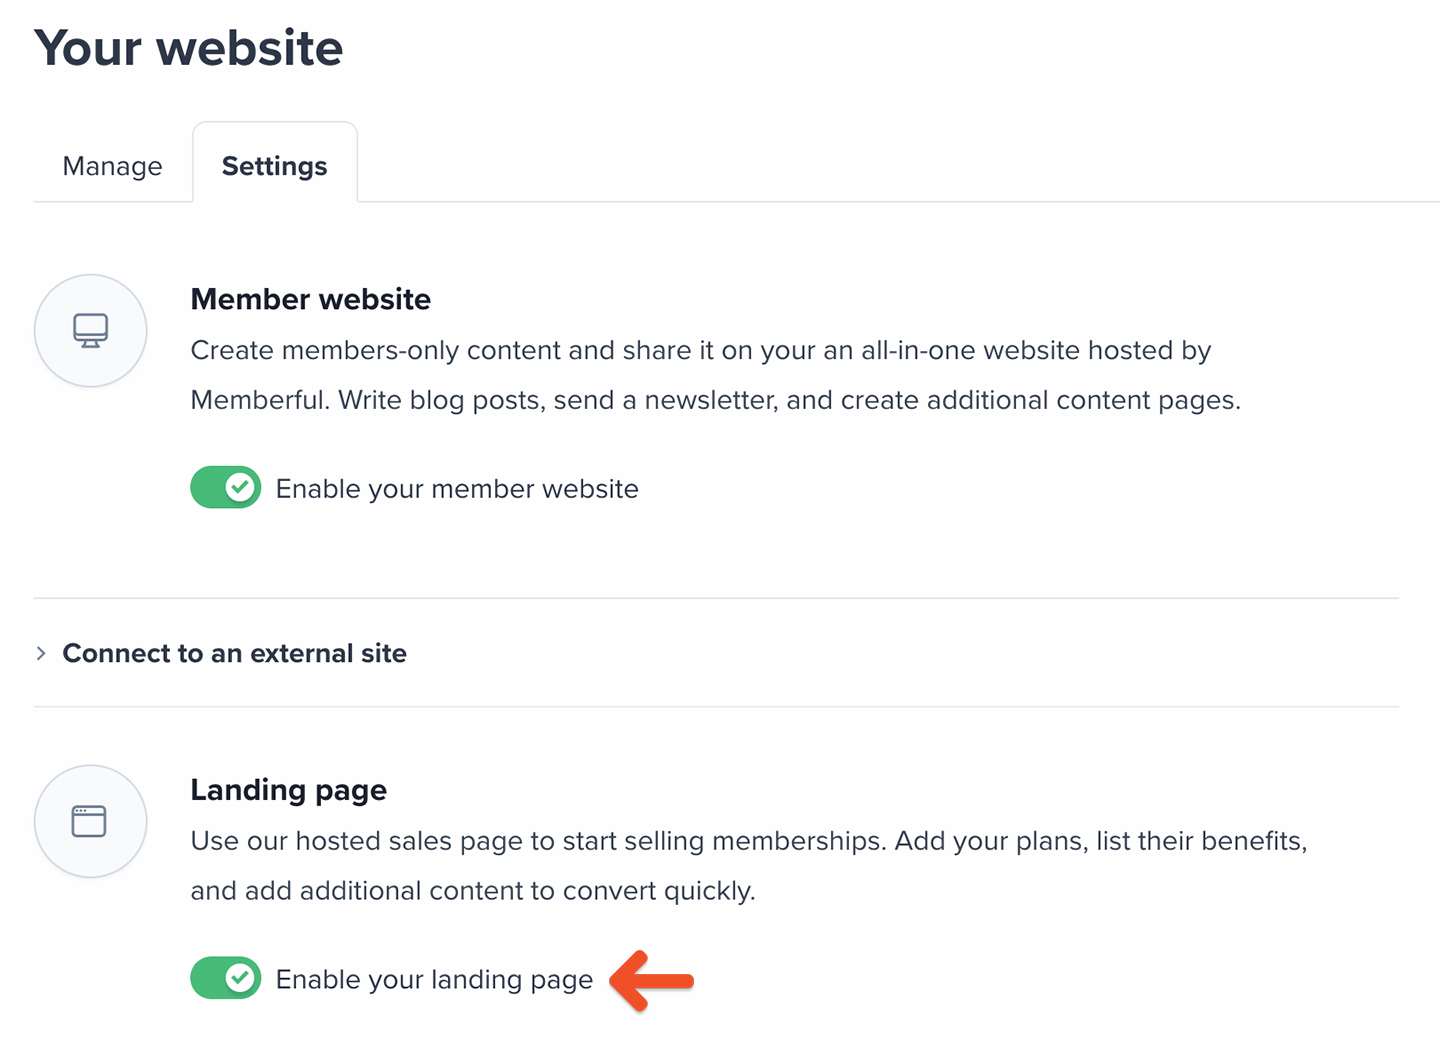 Enable landing page